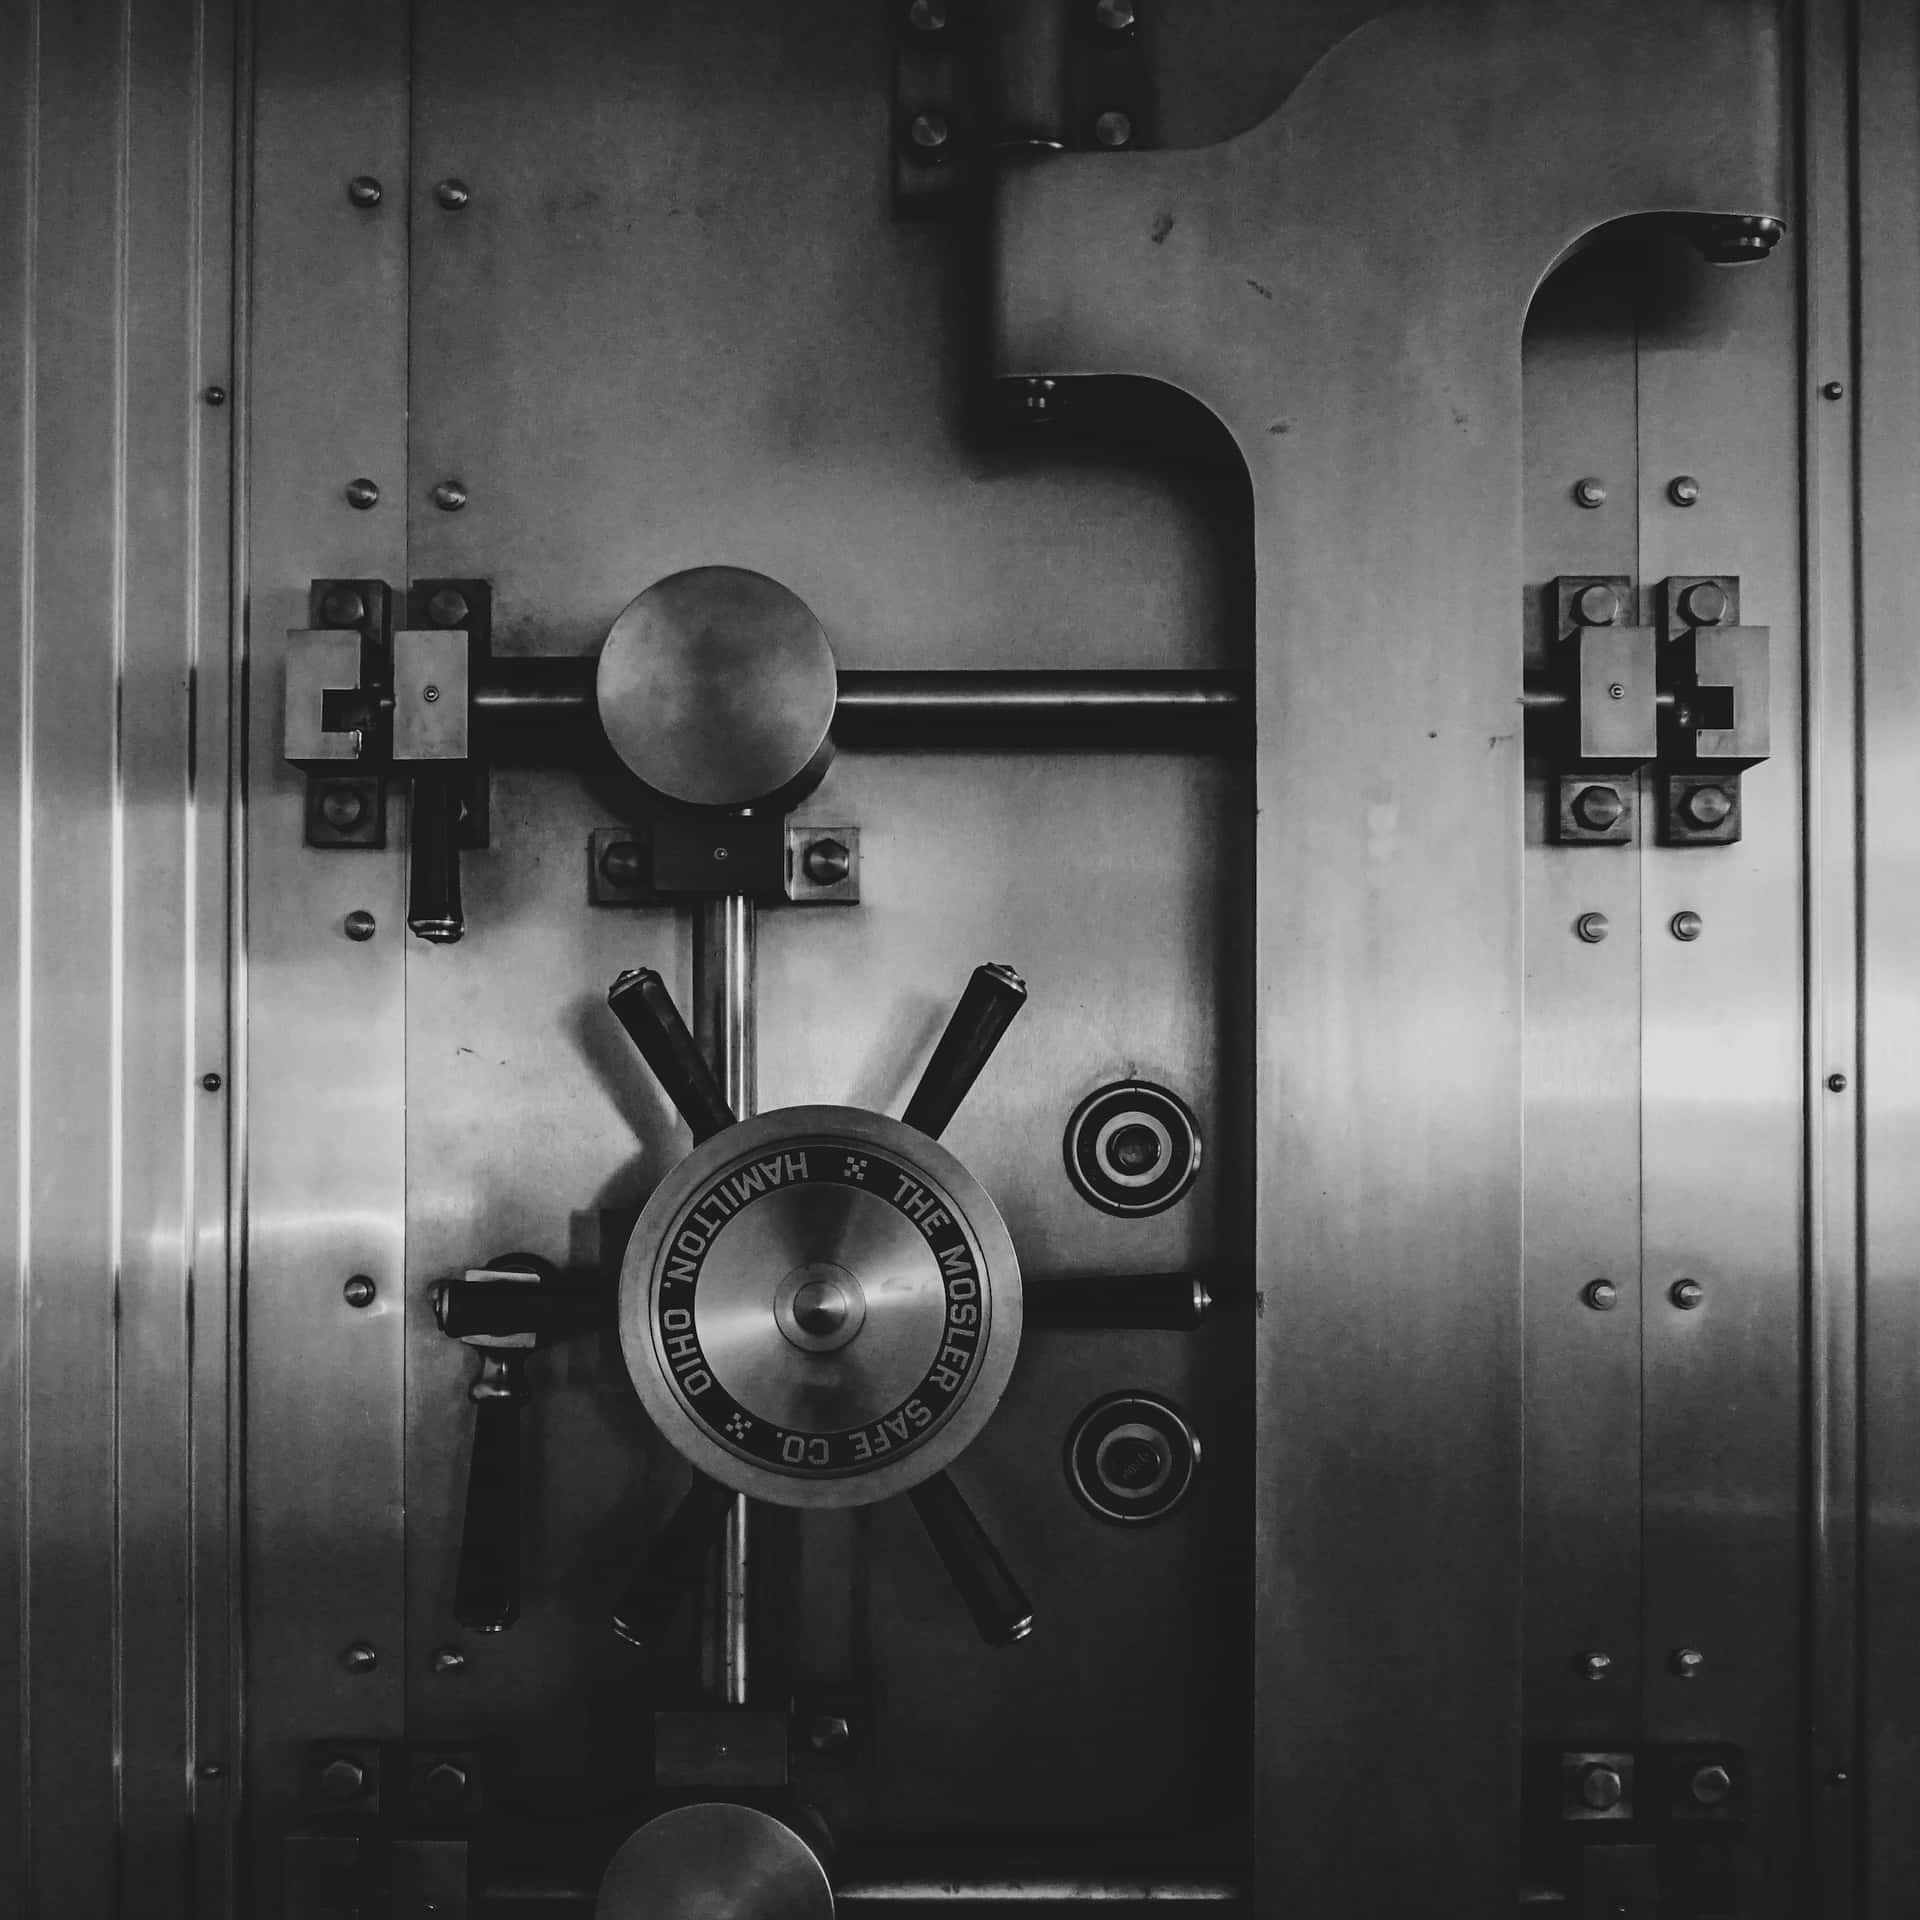 A Black And White Image Of A Bank Vault